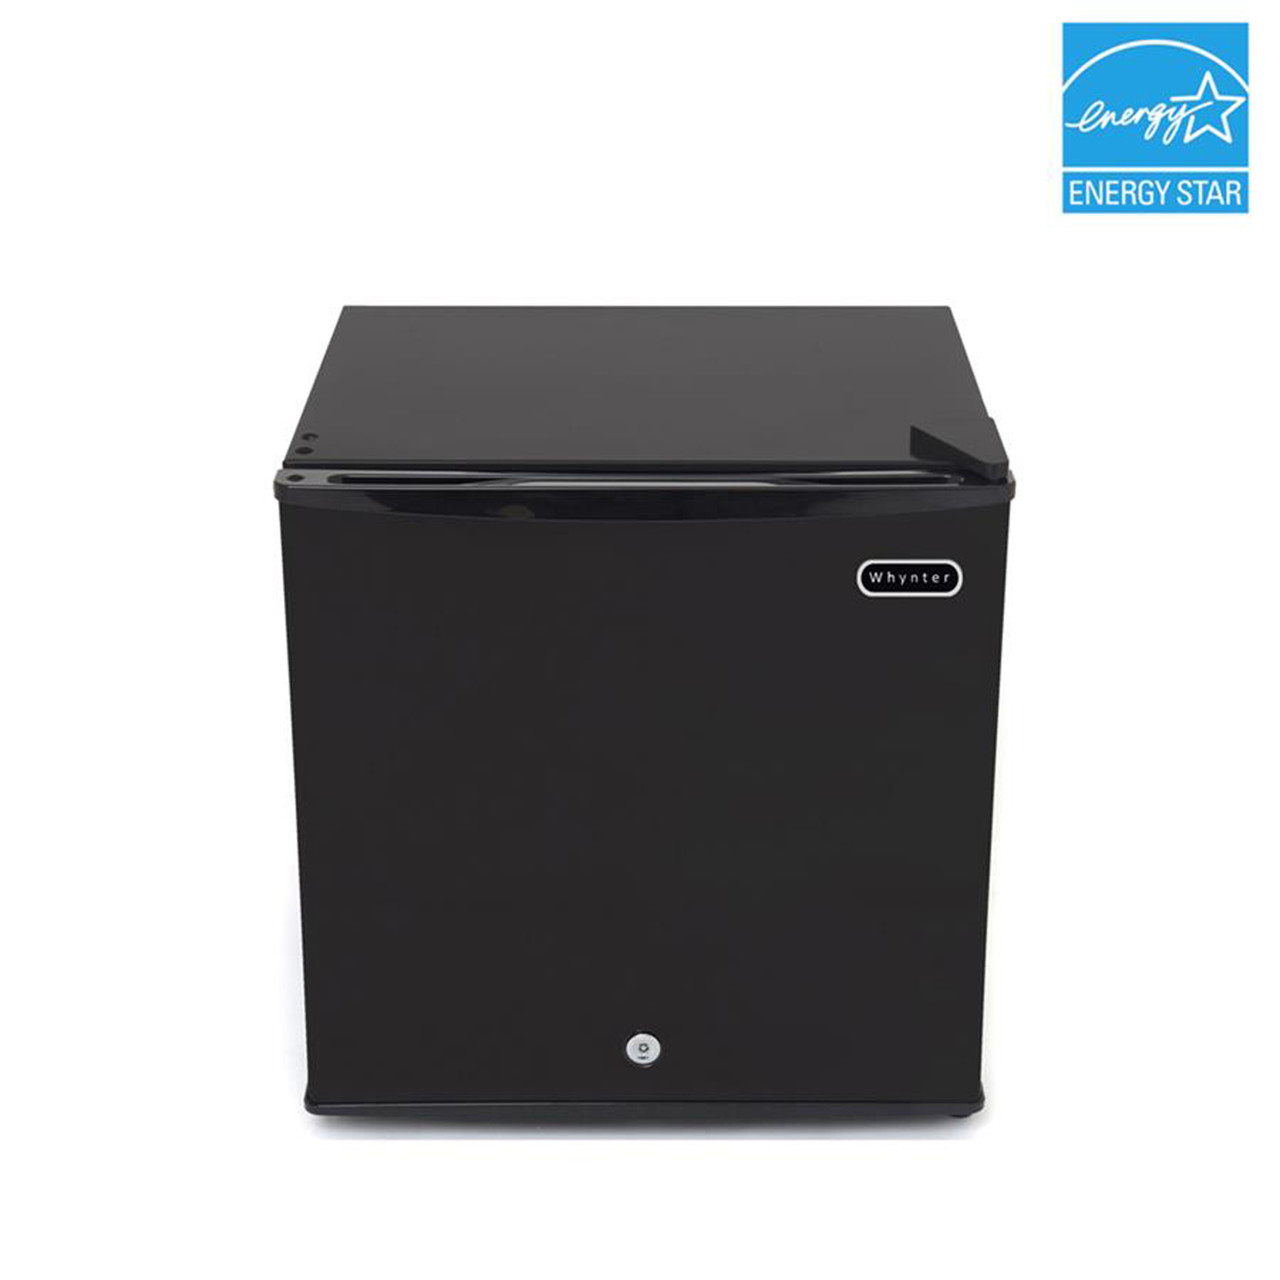 CUF-110B | CUF-110B Whynter 1.1 cu. ft. Energy Star Upright Freezer with  Lock - Ambient Stores